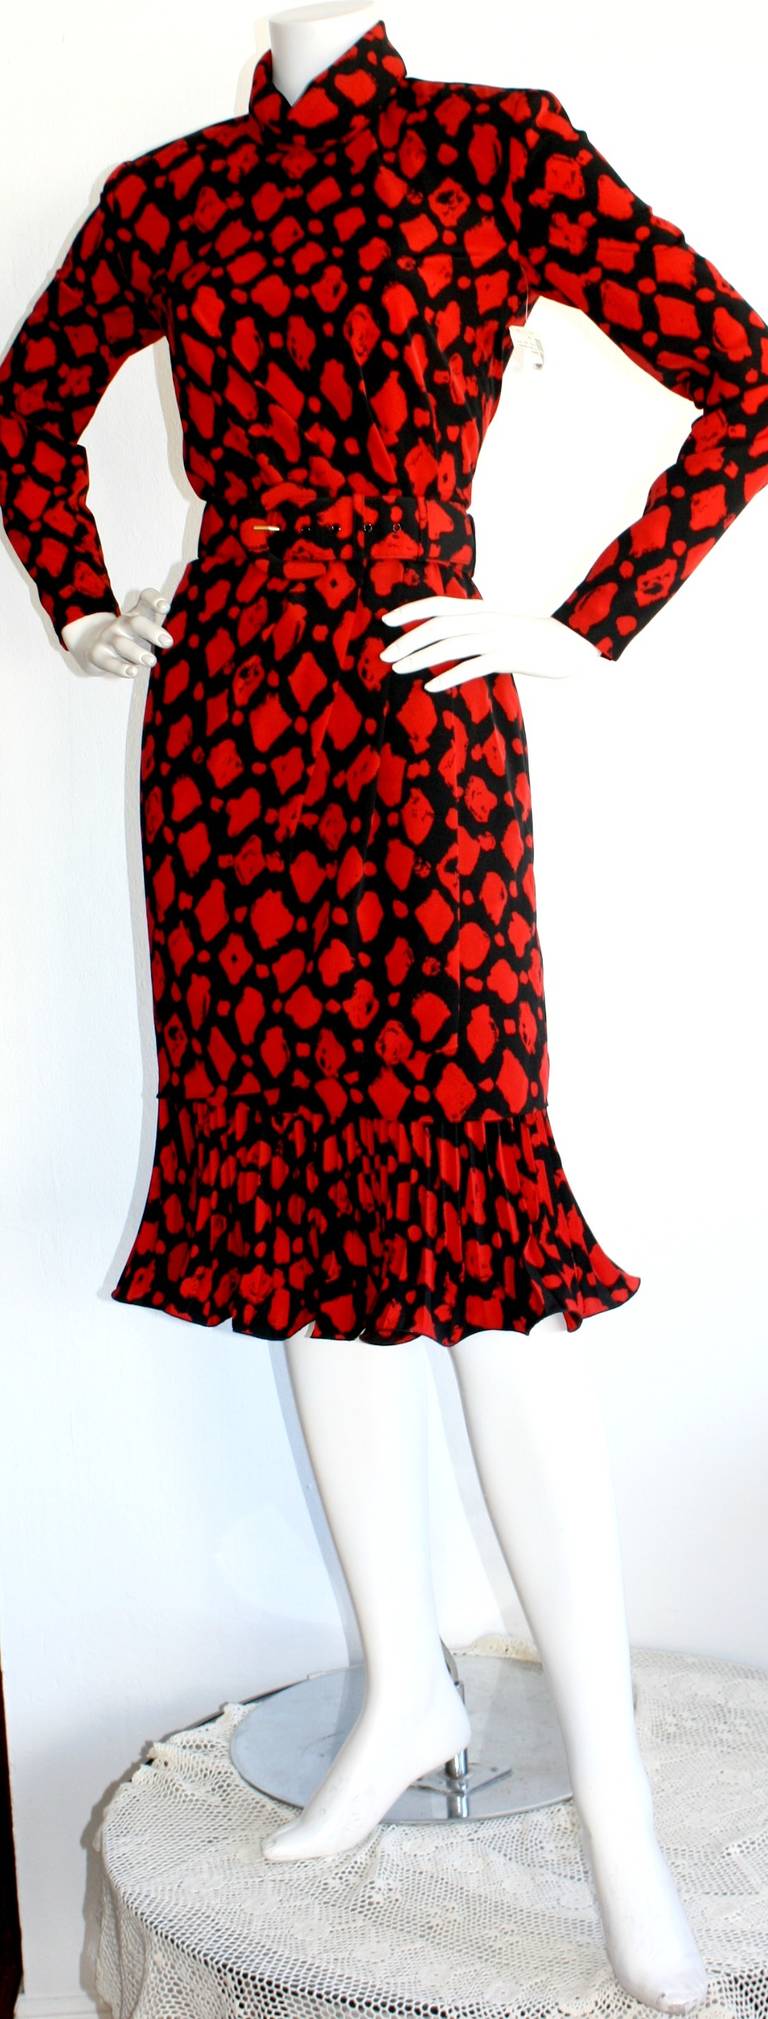 Beautiful vintage Louis Feraud red dress, with matching belt. Chic black abstract print, with a pleated peplum hem. Brand new w/ tags from SAKS 5th Ave. In great condition. Marked size US 4, EU 36

Measurements:
36 inch bust
26 inch waist
38